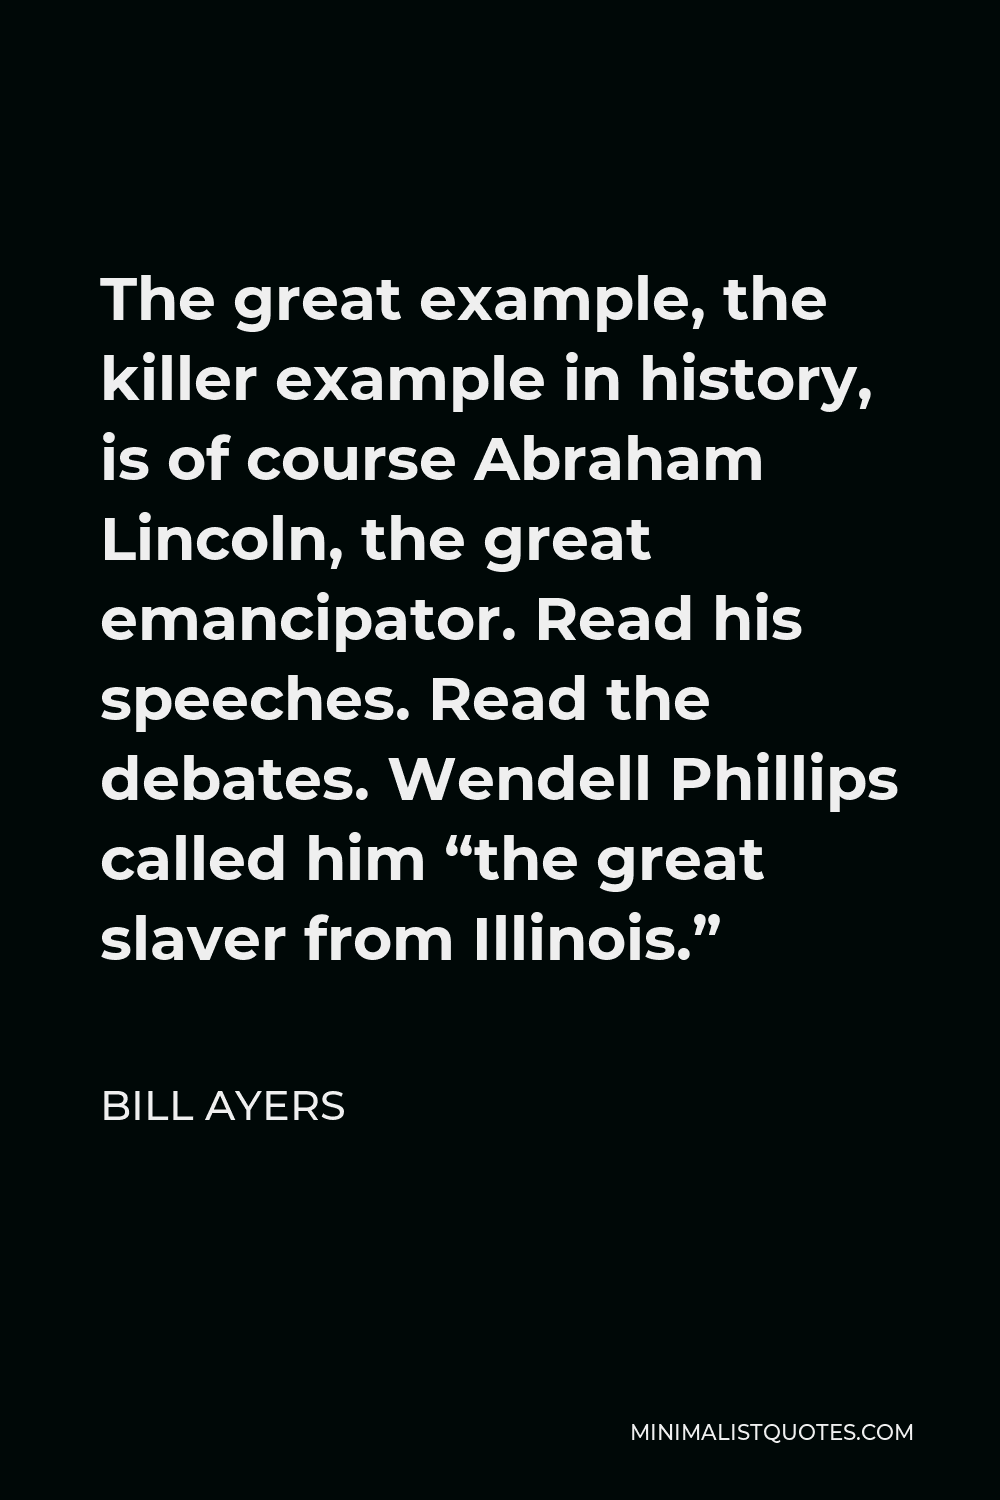 Bill Ayers Quote - The great example, the killer example in history, is of course Abraham Lincoln, the great emancipator. Read his speeches. Read the debates. Wendell Phillips called him “the great slaver from Illinois.”